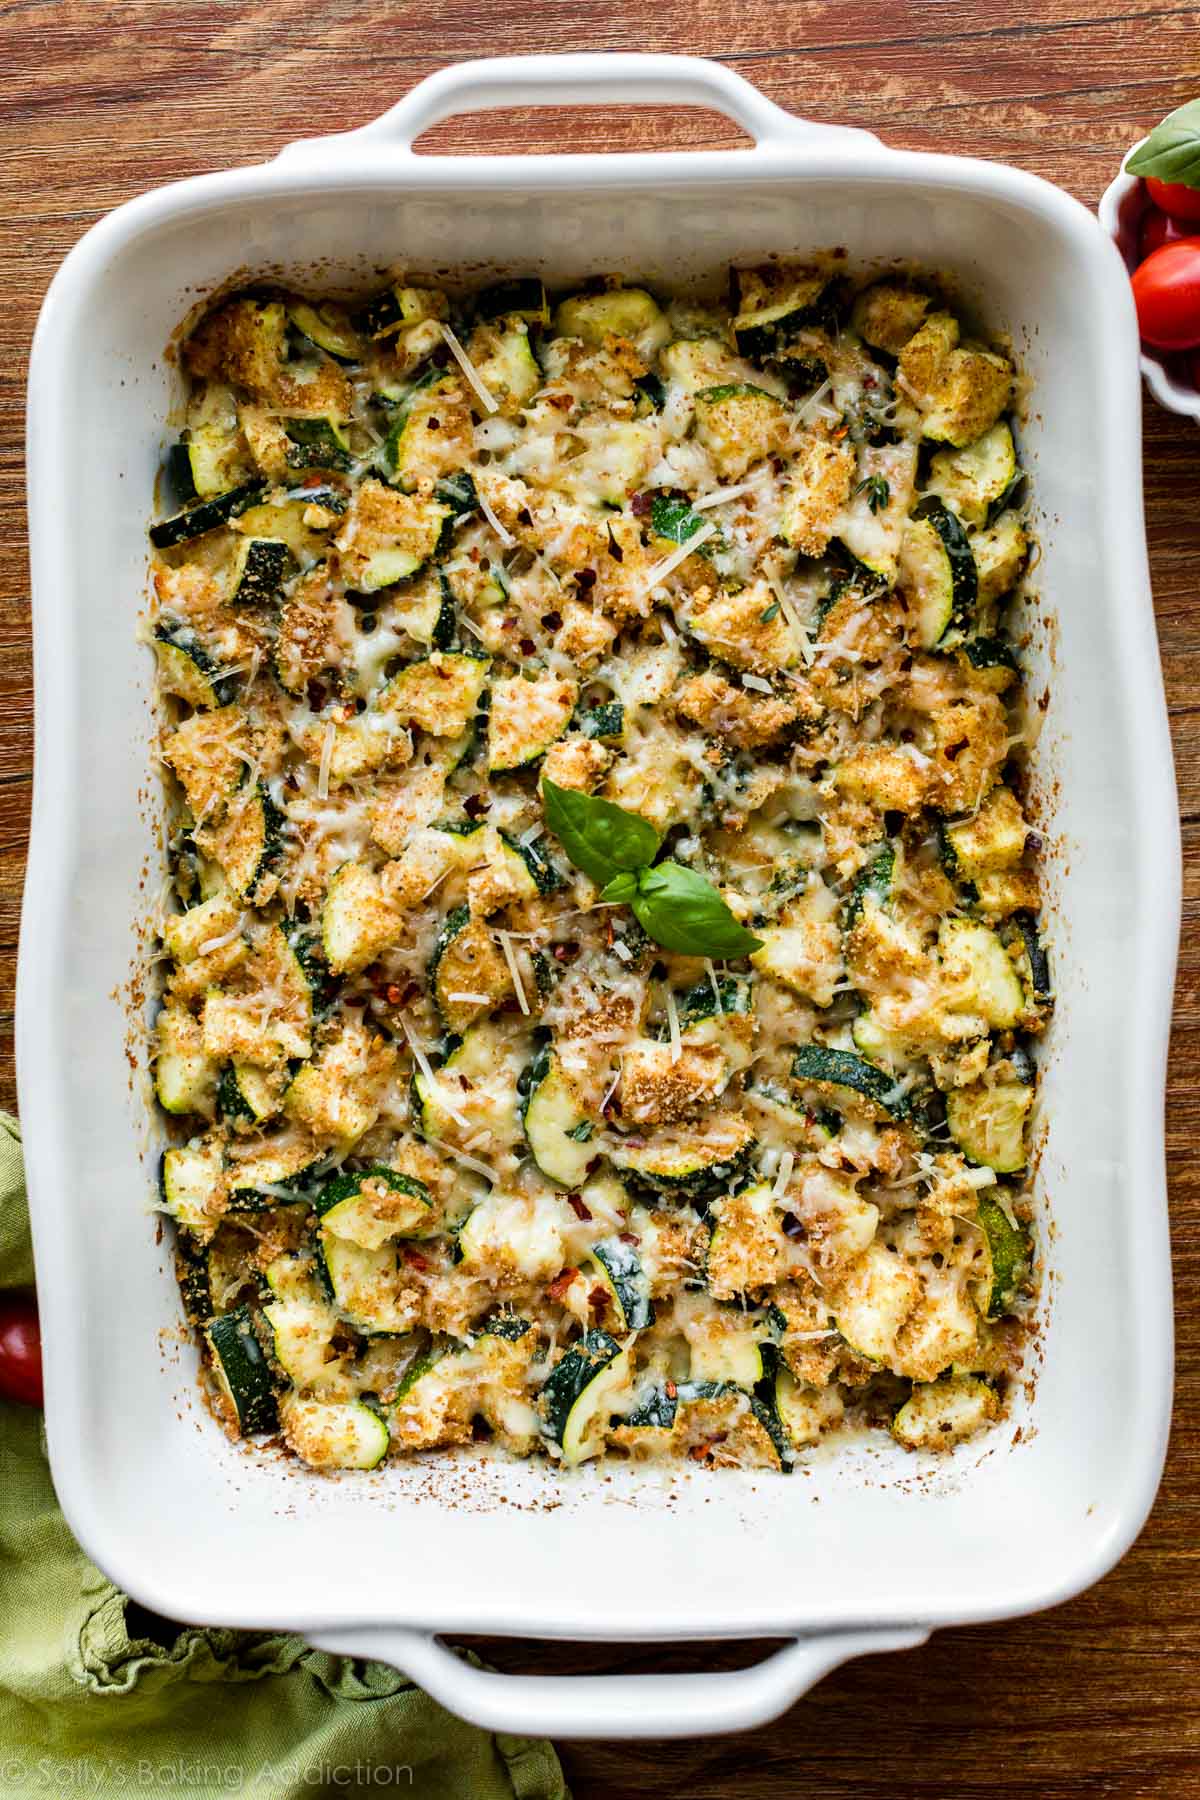 zucchini and feta side dish with breadcrumbs, basil, and fresh parmesan cheese on top